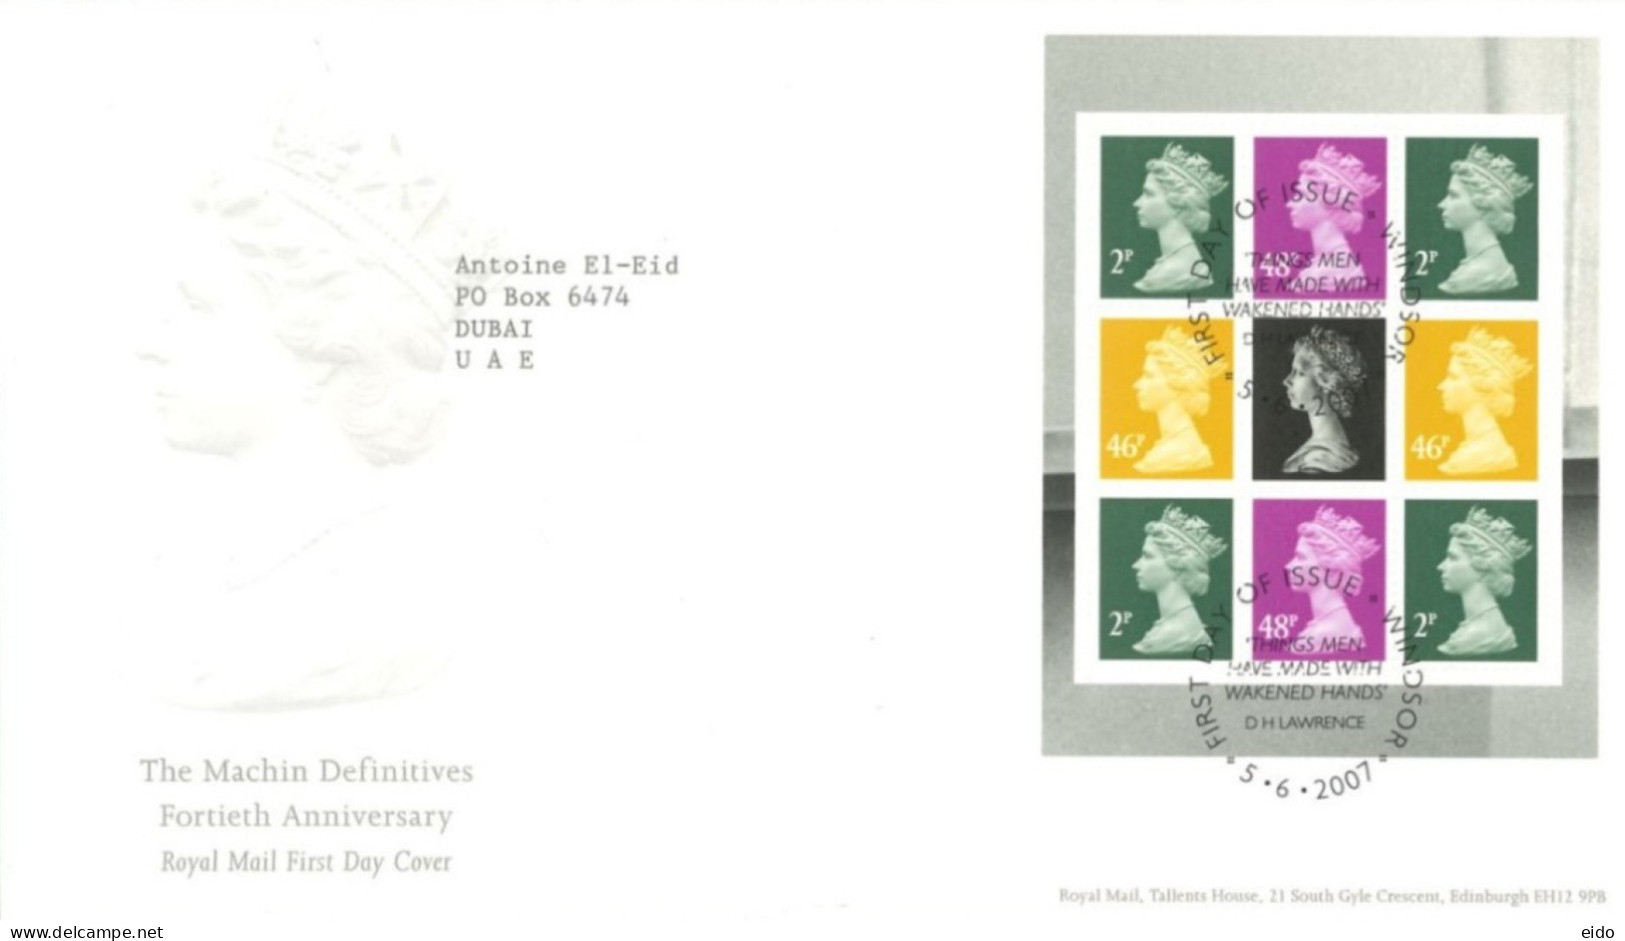 GREAT BRITAIN  - 2007, FDC OF THE MACHIN DEFINITIVES FORTIETH ANNIVERSARY STAMPS SHEET INCLUDING PRESENTATION CARD - Briefe U. Dokumente